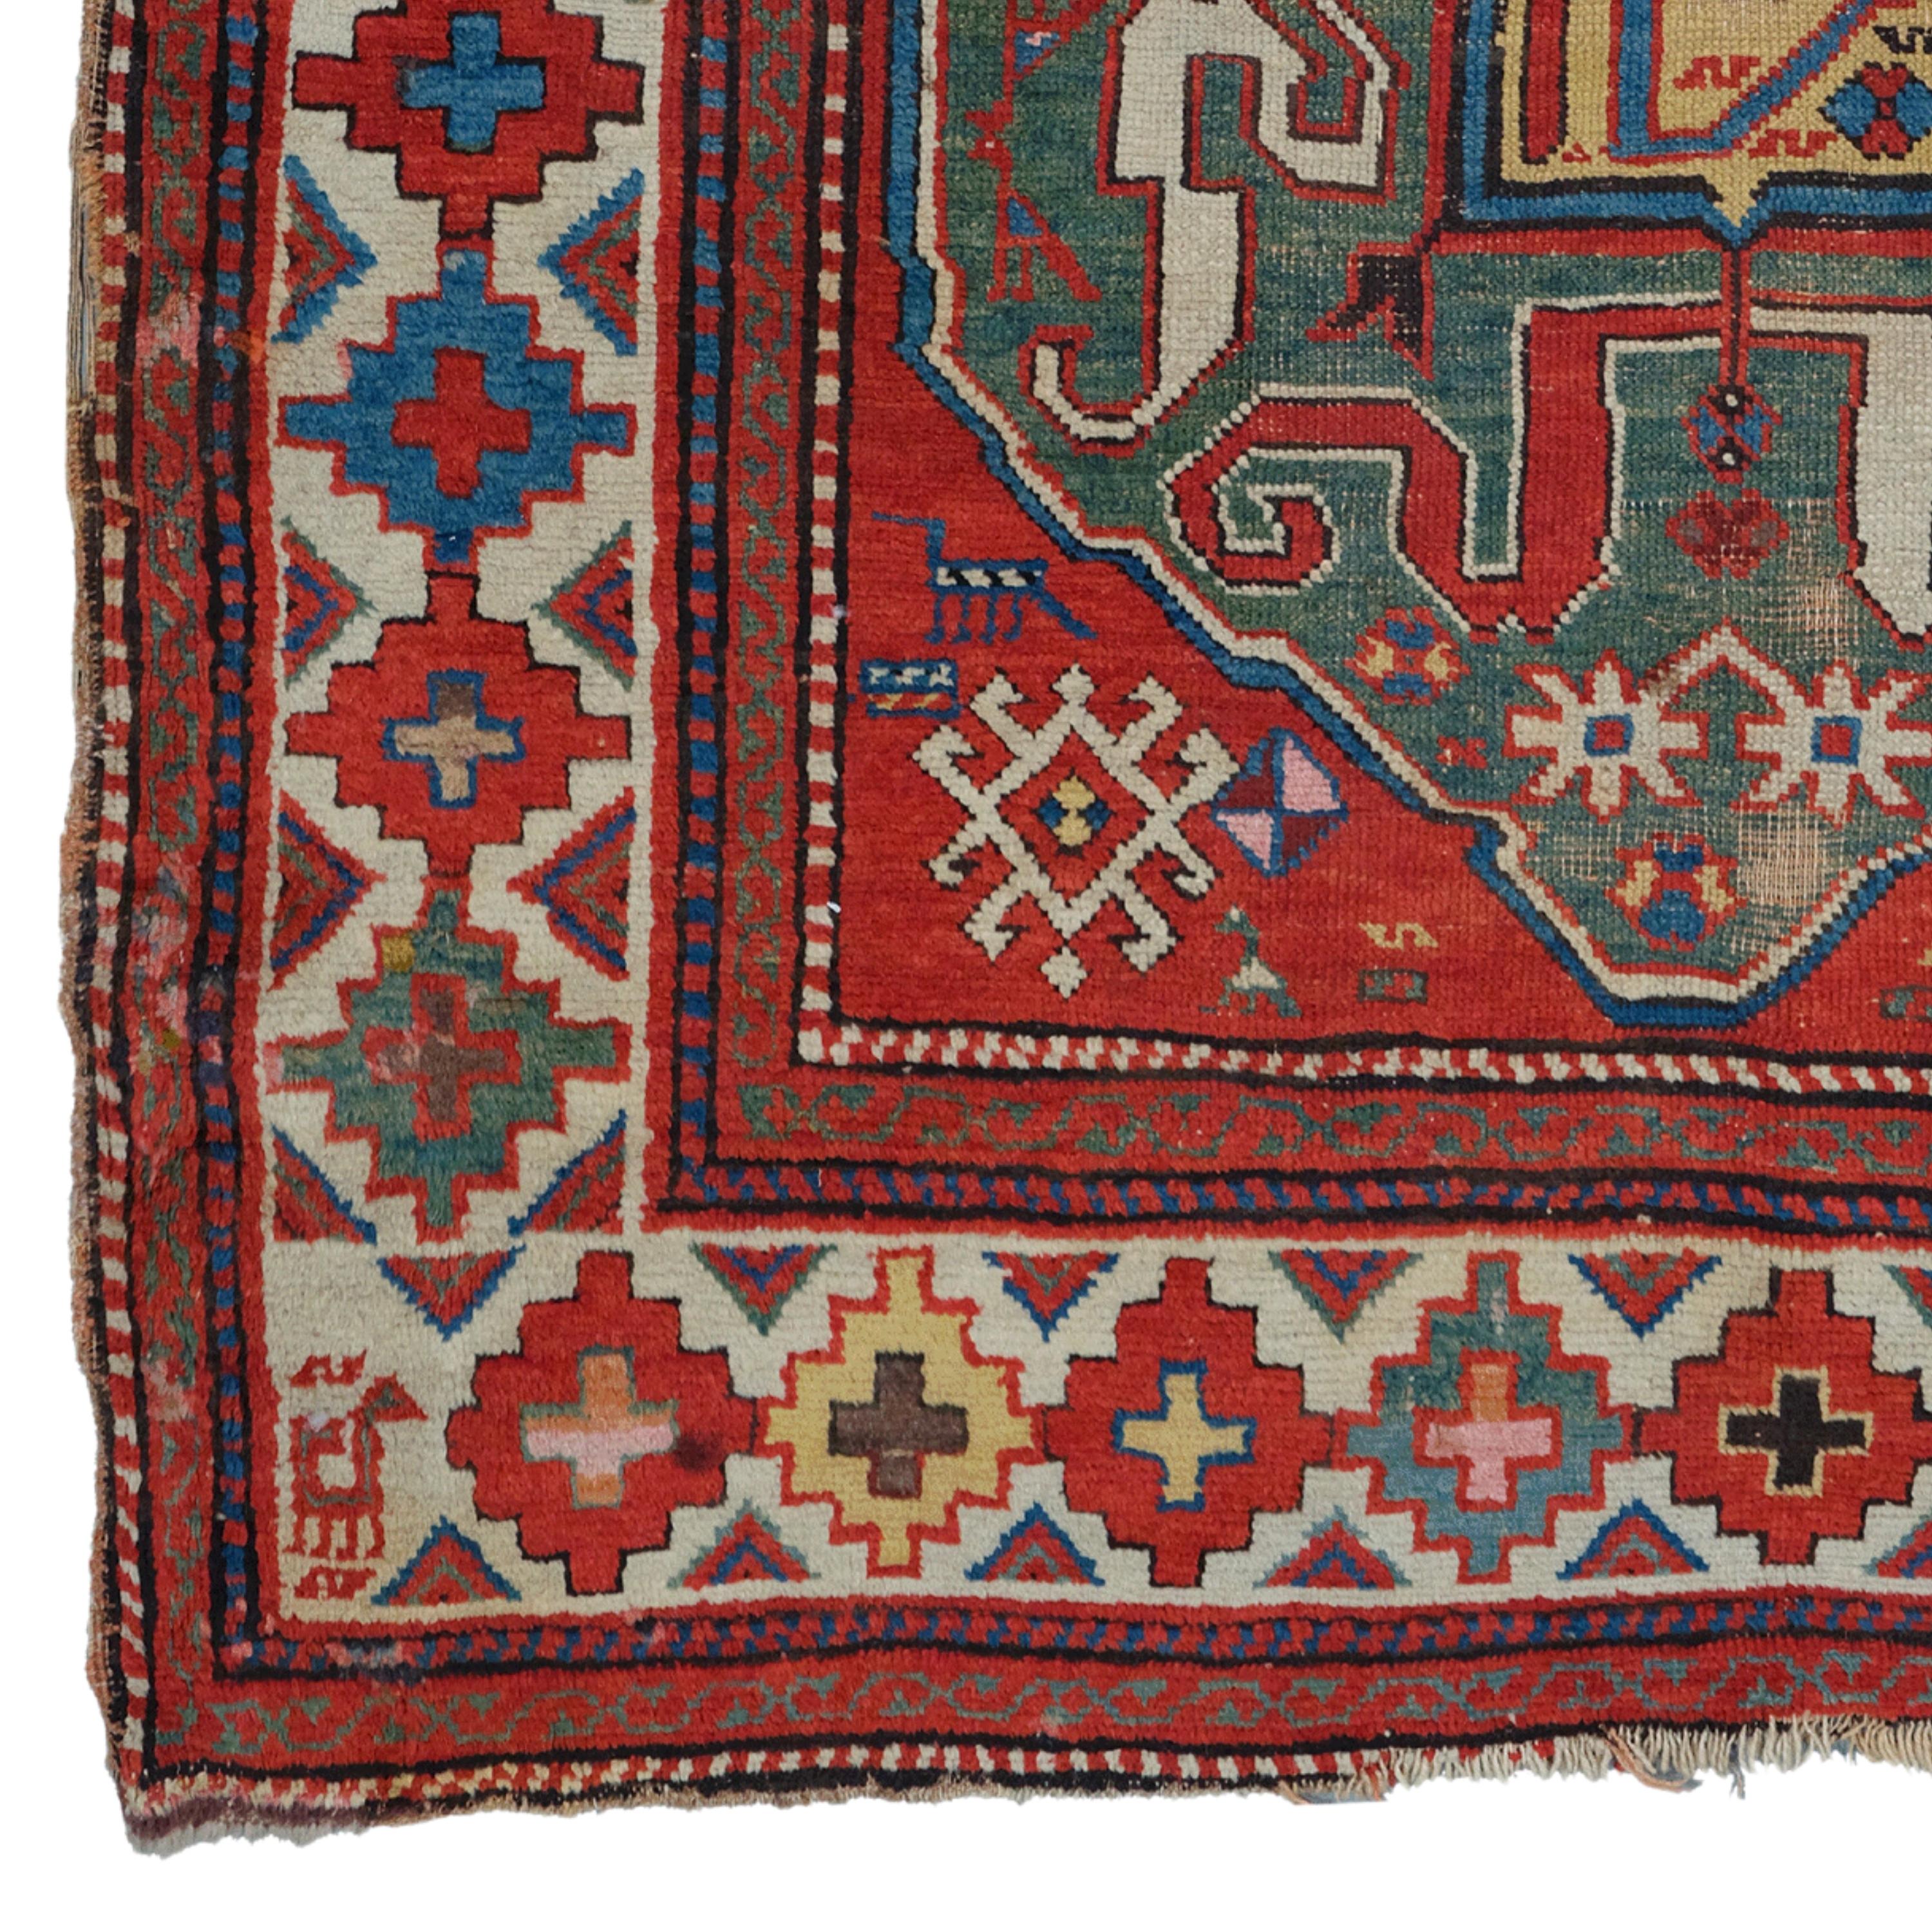 Antique Cloudband Rug
19th Century Cloudband Rug
Size: 135x212 cm  4,42x6,95 Ft

This 19th-century Caucasian Cloudband rug offers a perfect combination of history and art. This carefully hand-woven work dazzles with its complex patterns and vibrant